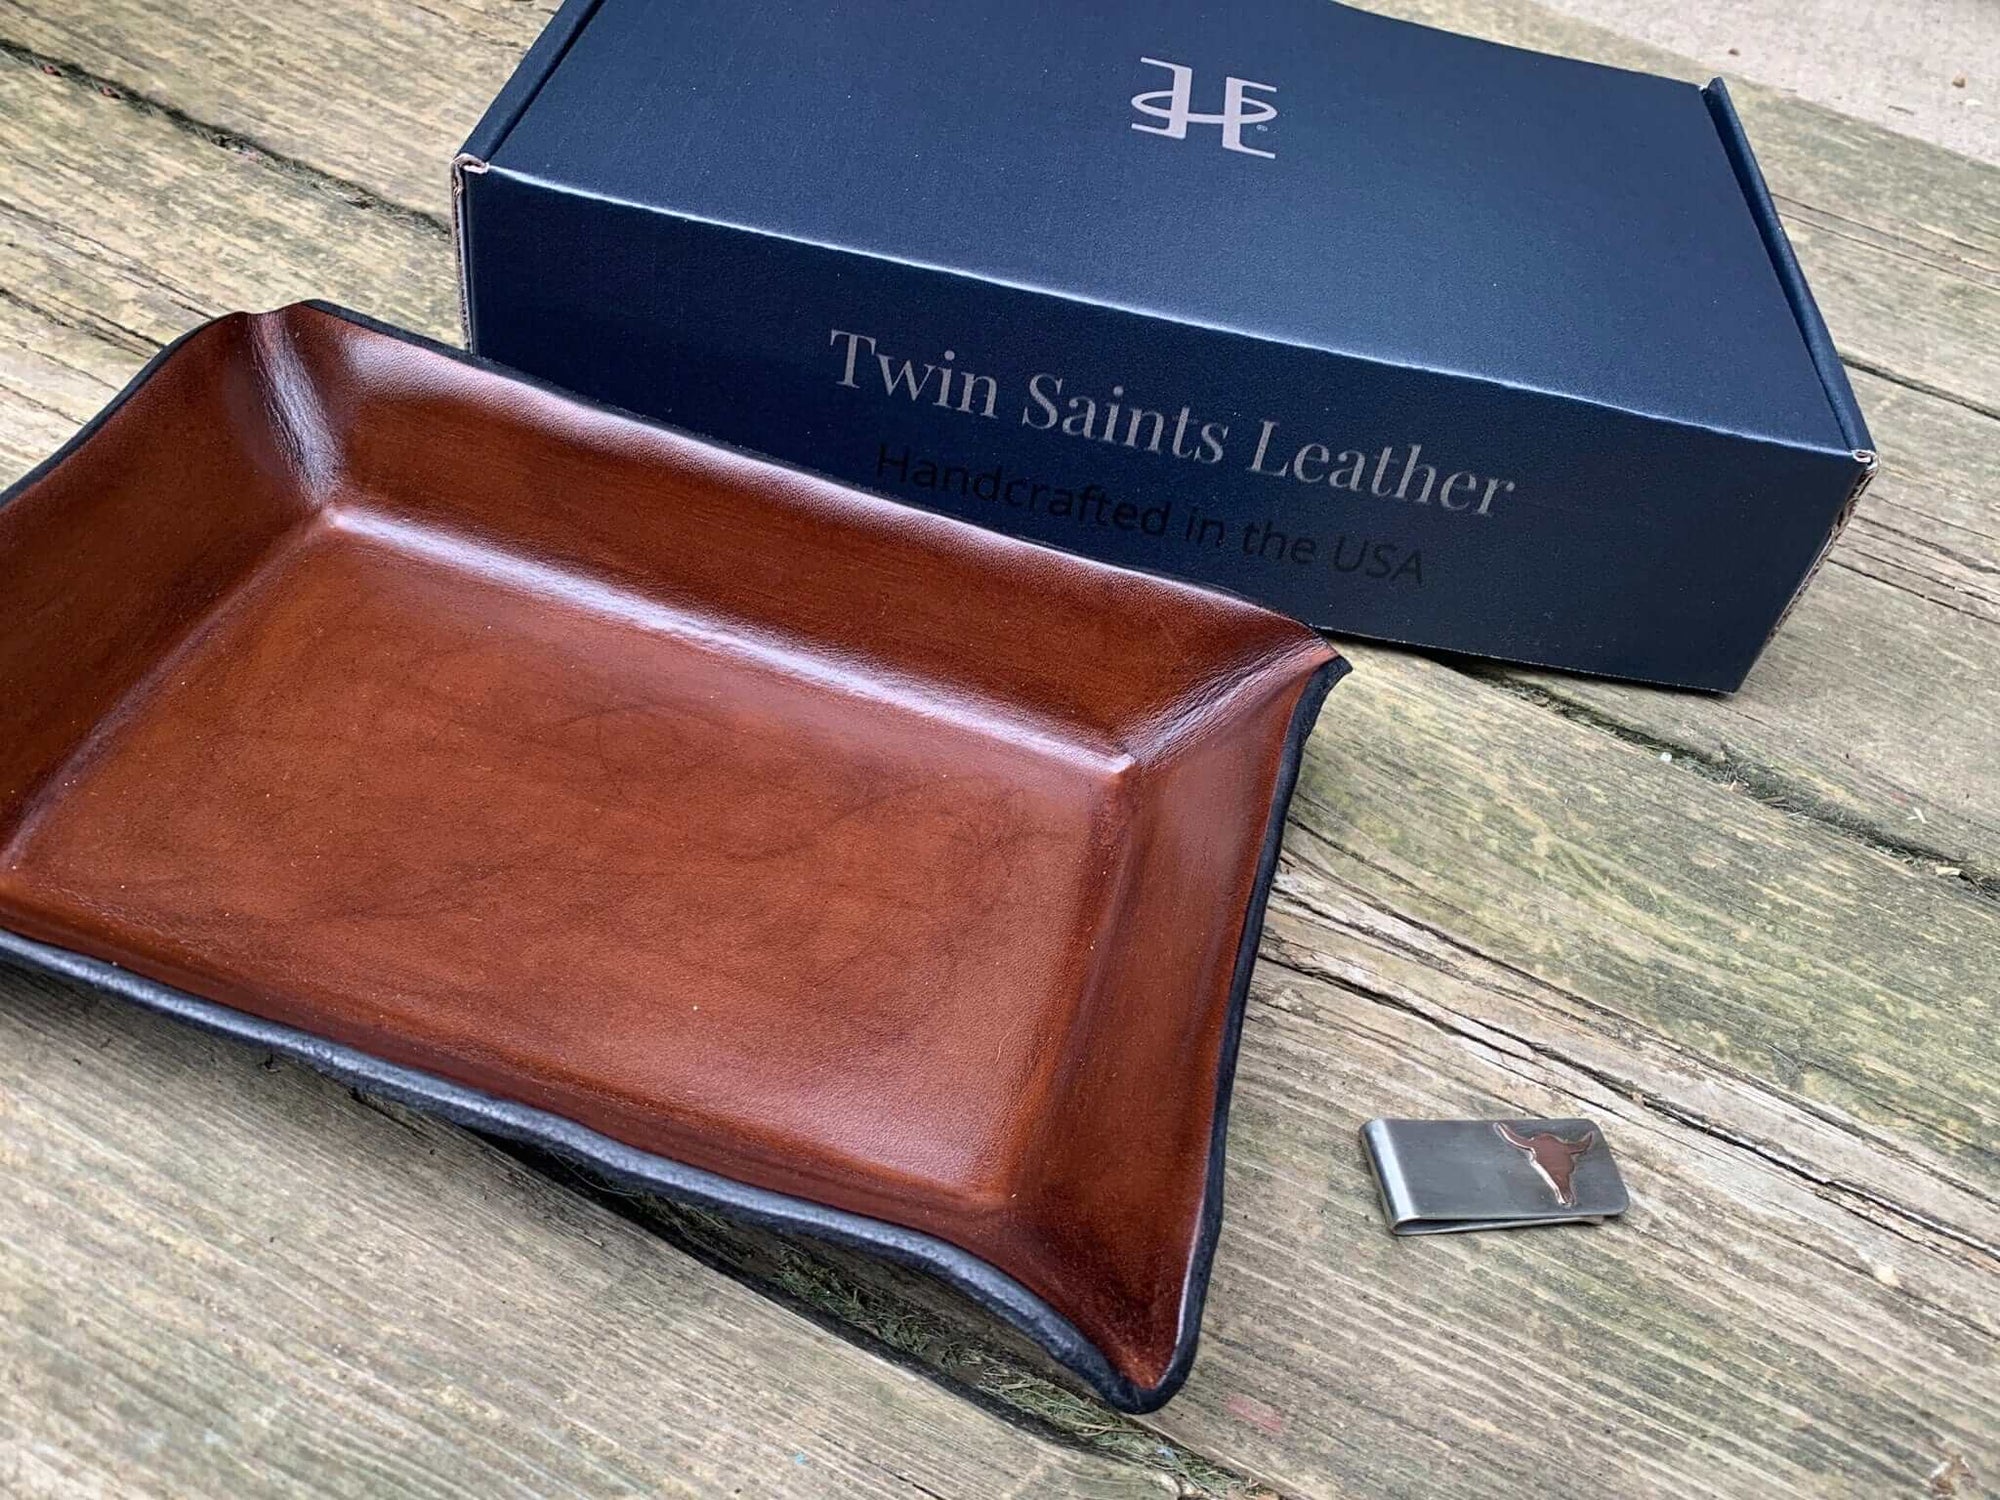 Exclusive boxed gift set with rectangular leather valet tray and handcrafted money clip